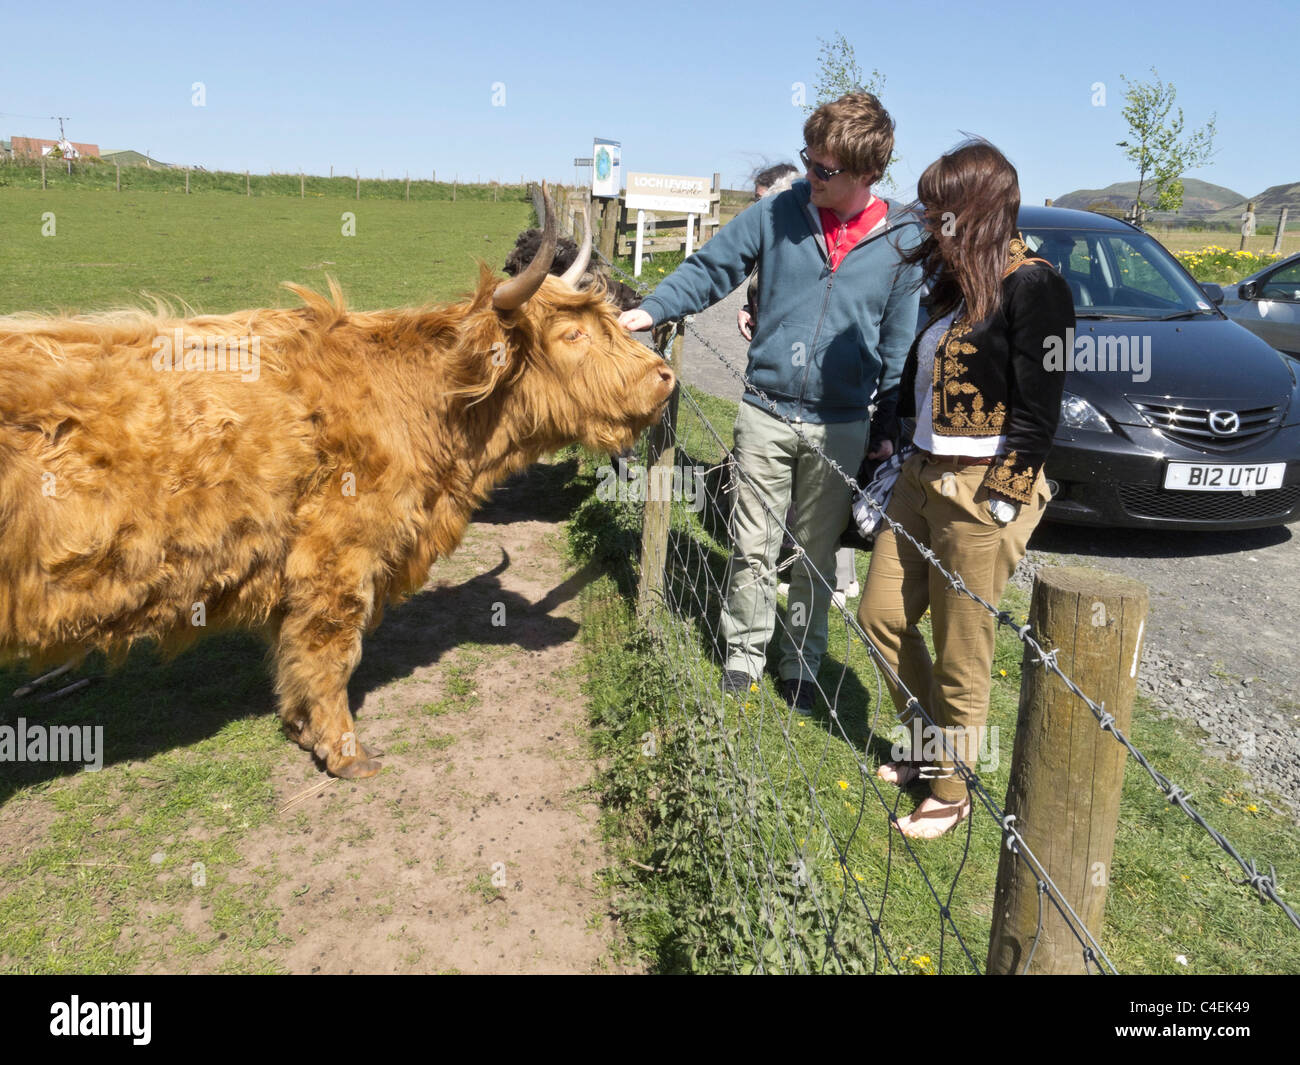 The Laird's Larder, Loch Leven, Scotland - saying hello to a friendly Highland cow. Stock Photo